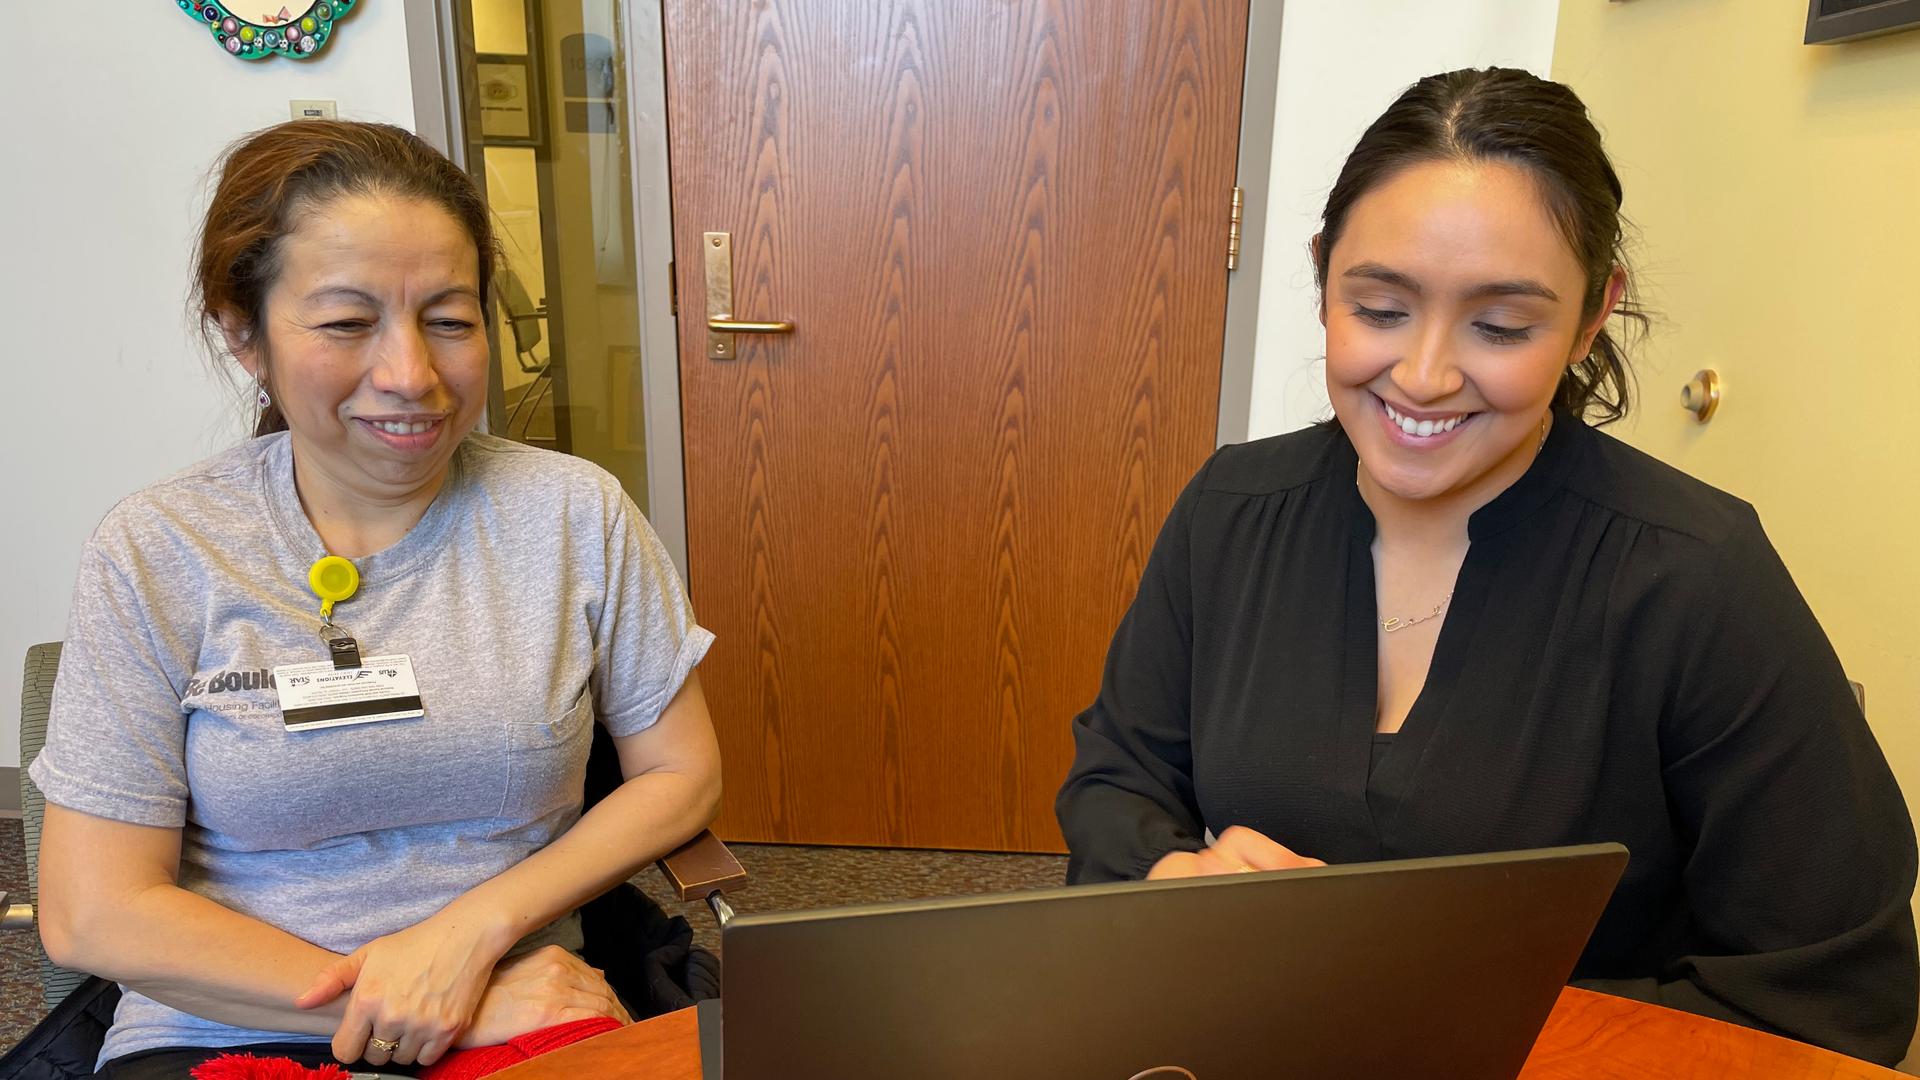 María Teresa Navas Mejía, a long-term employee at the University of Colorado Boulder, recently received her green card thanks to Carina De La Torre and students in Colorado Law’s Immigration Defense Clinic.